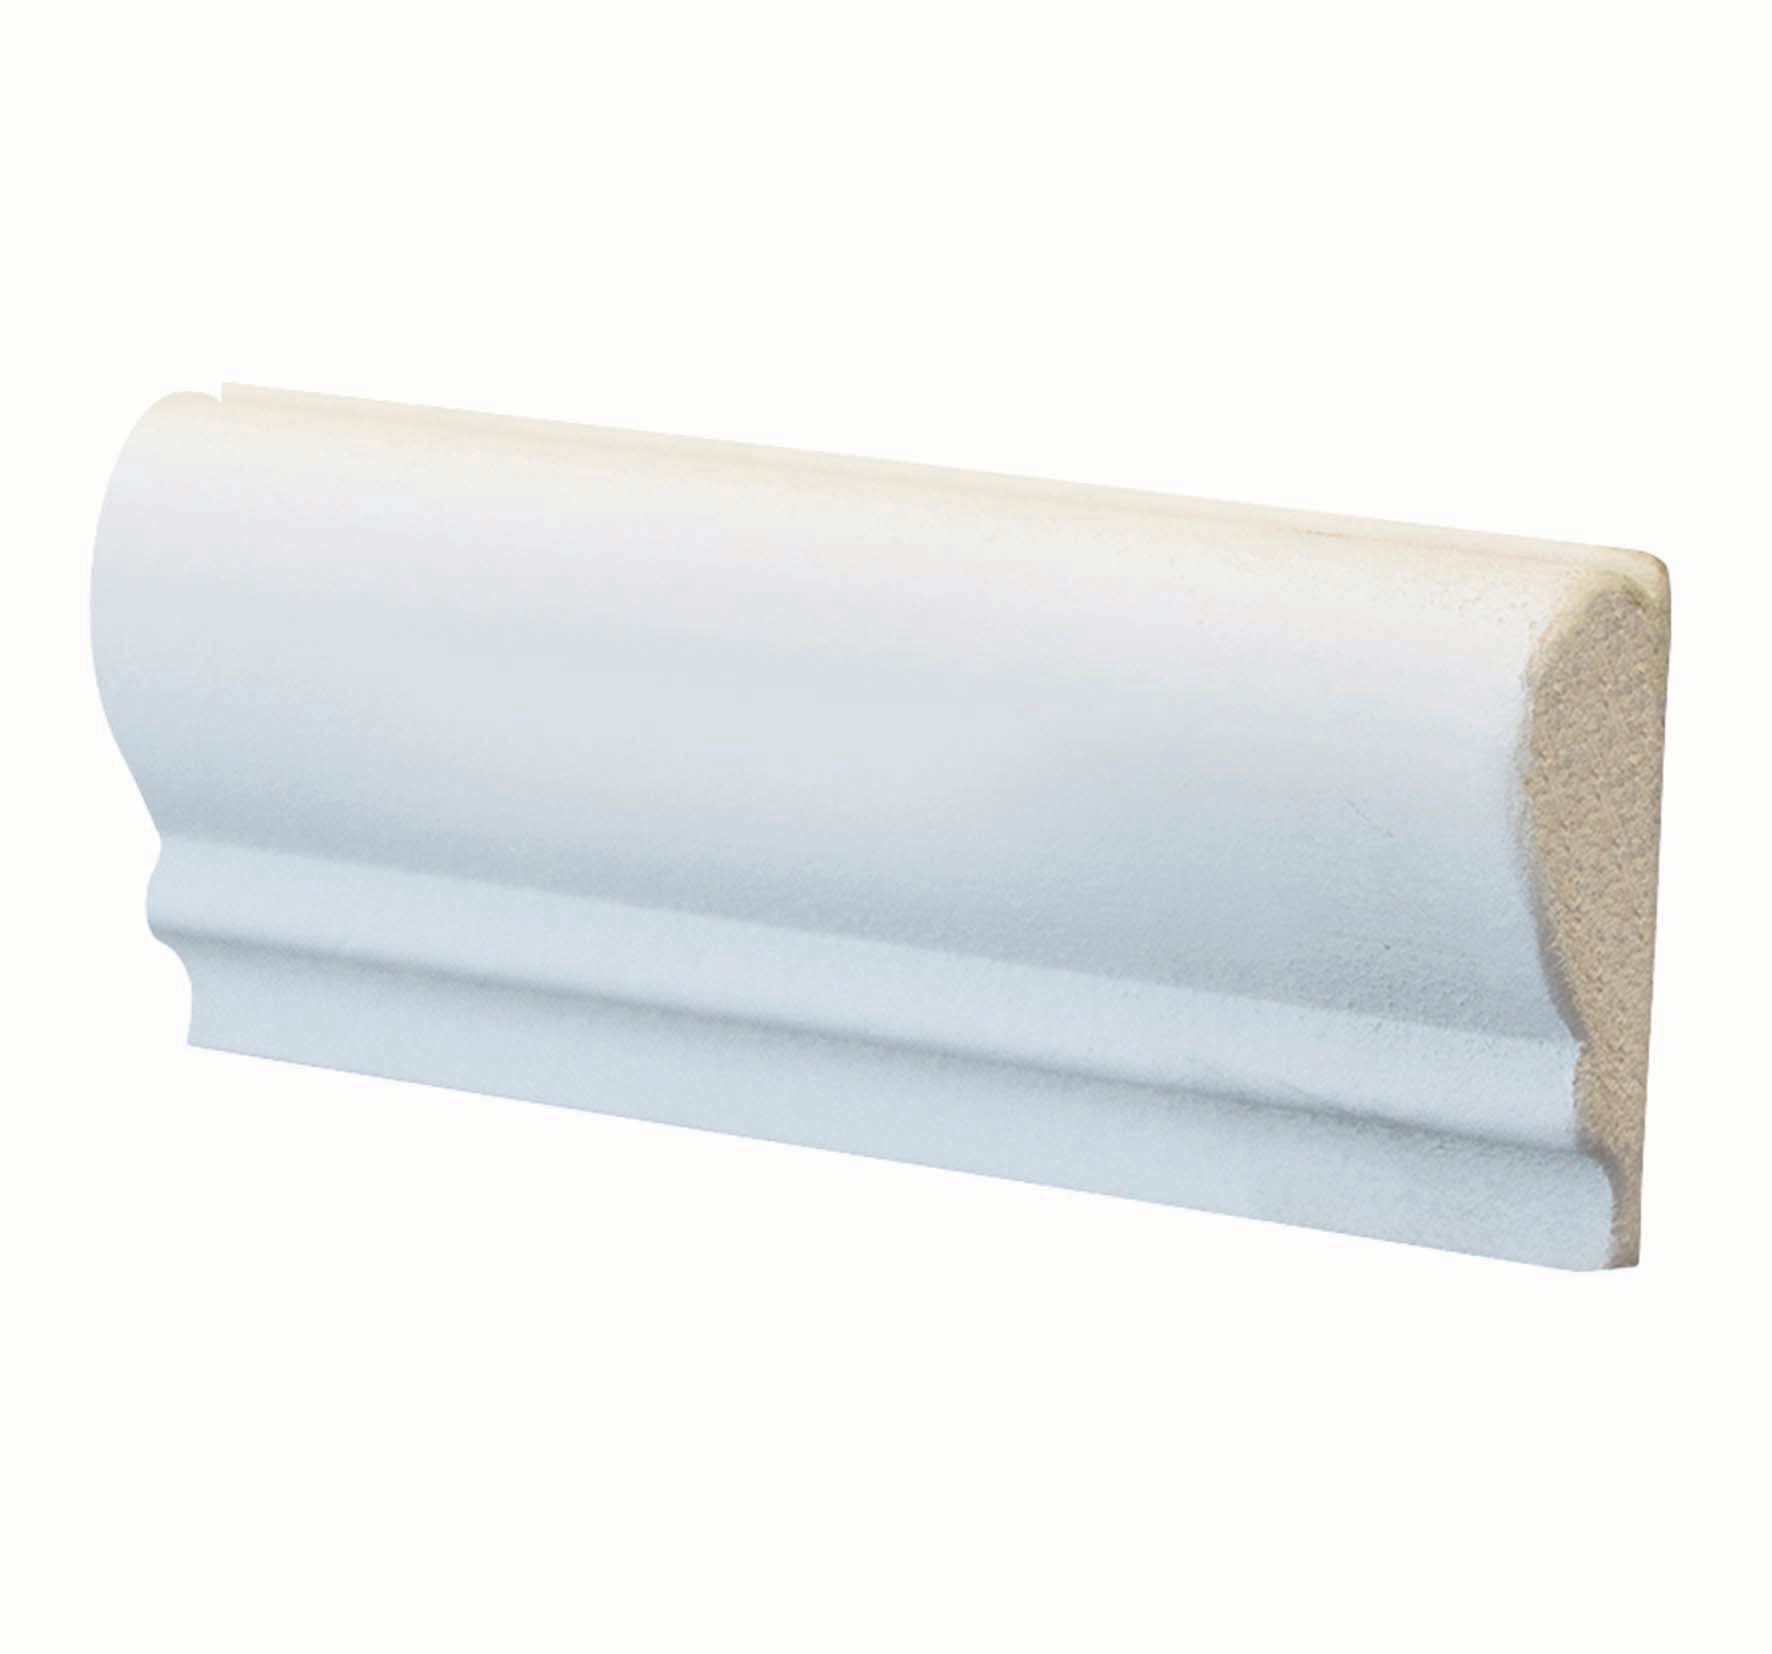 Image of Wickes Picture Rail Primed MDF - 18mm x 44mm x 2.4m